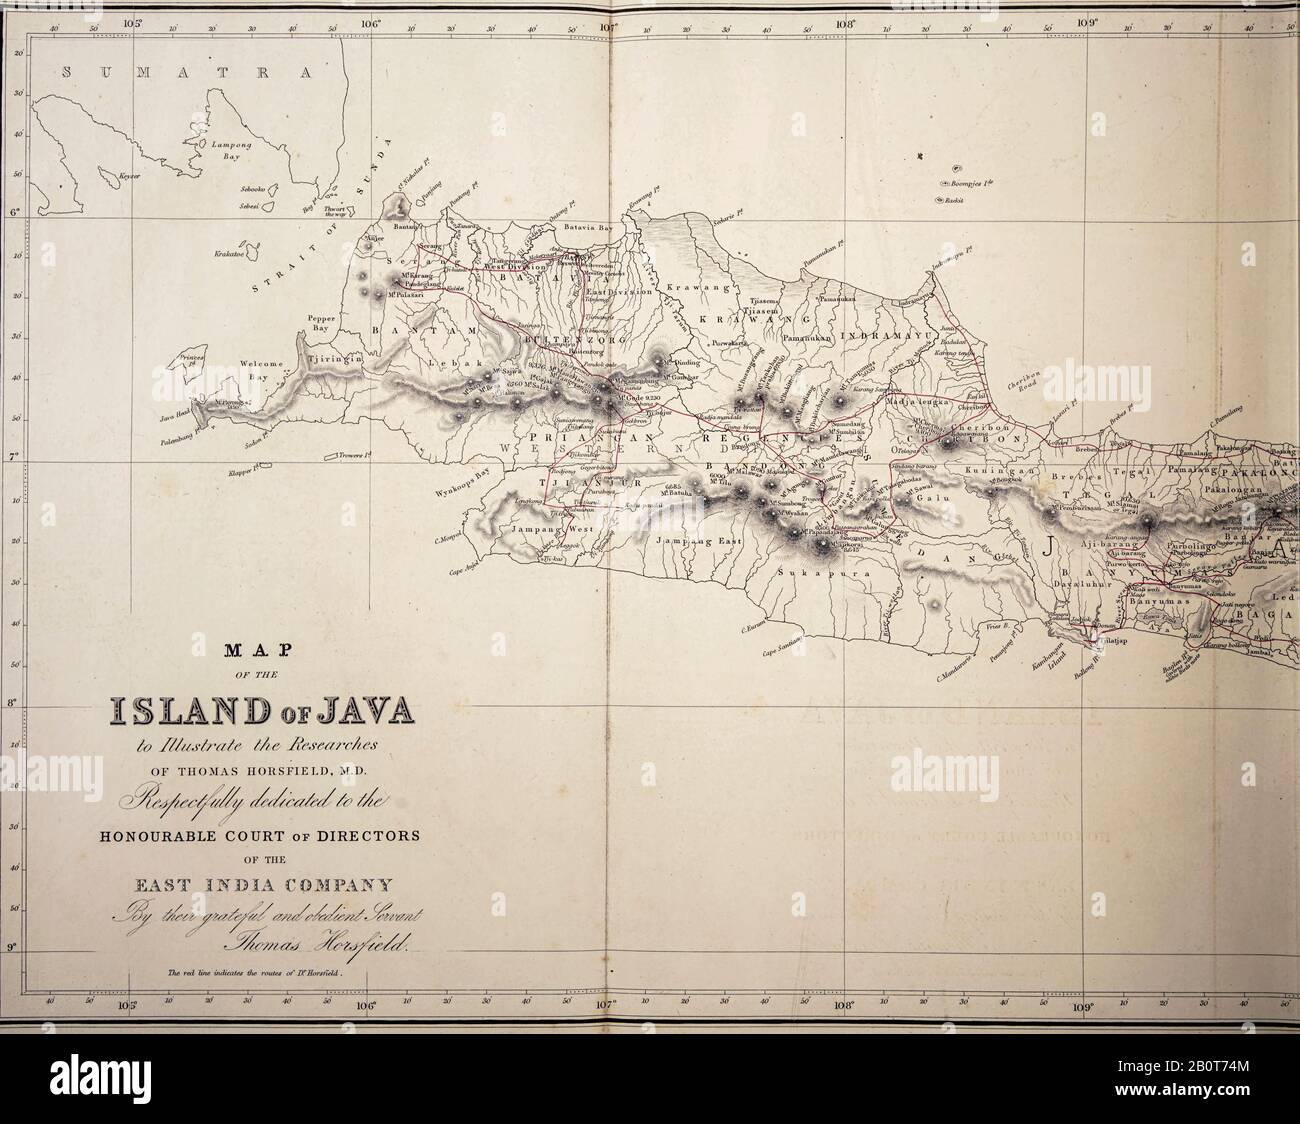 Ancient map of the west of the Island of Java from the 19th century manuscript 'Plantae Javanicae rariores, descriptae iconibusque illustratae, quas in insula Java, annis 1802-1818' (Java Plants, Description of plants on the island of Java) by Horsfield, Thomas, 1773-1859 Published in Latin in London in 1838 Stock Photo